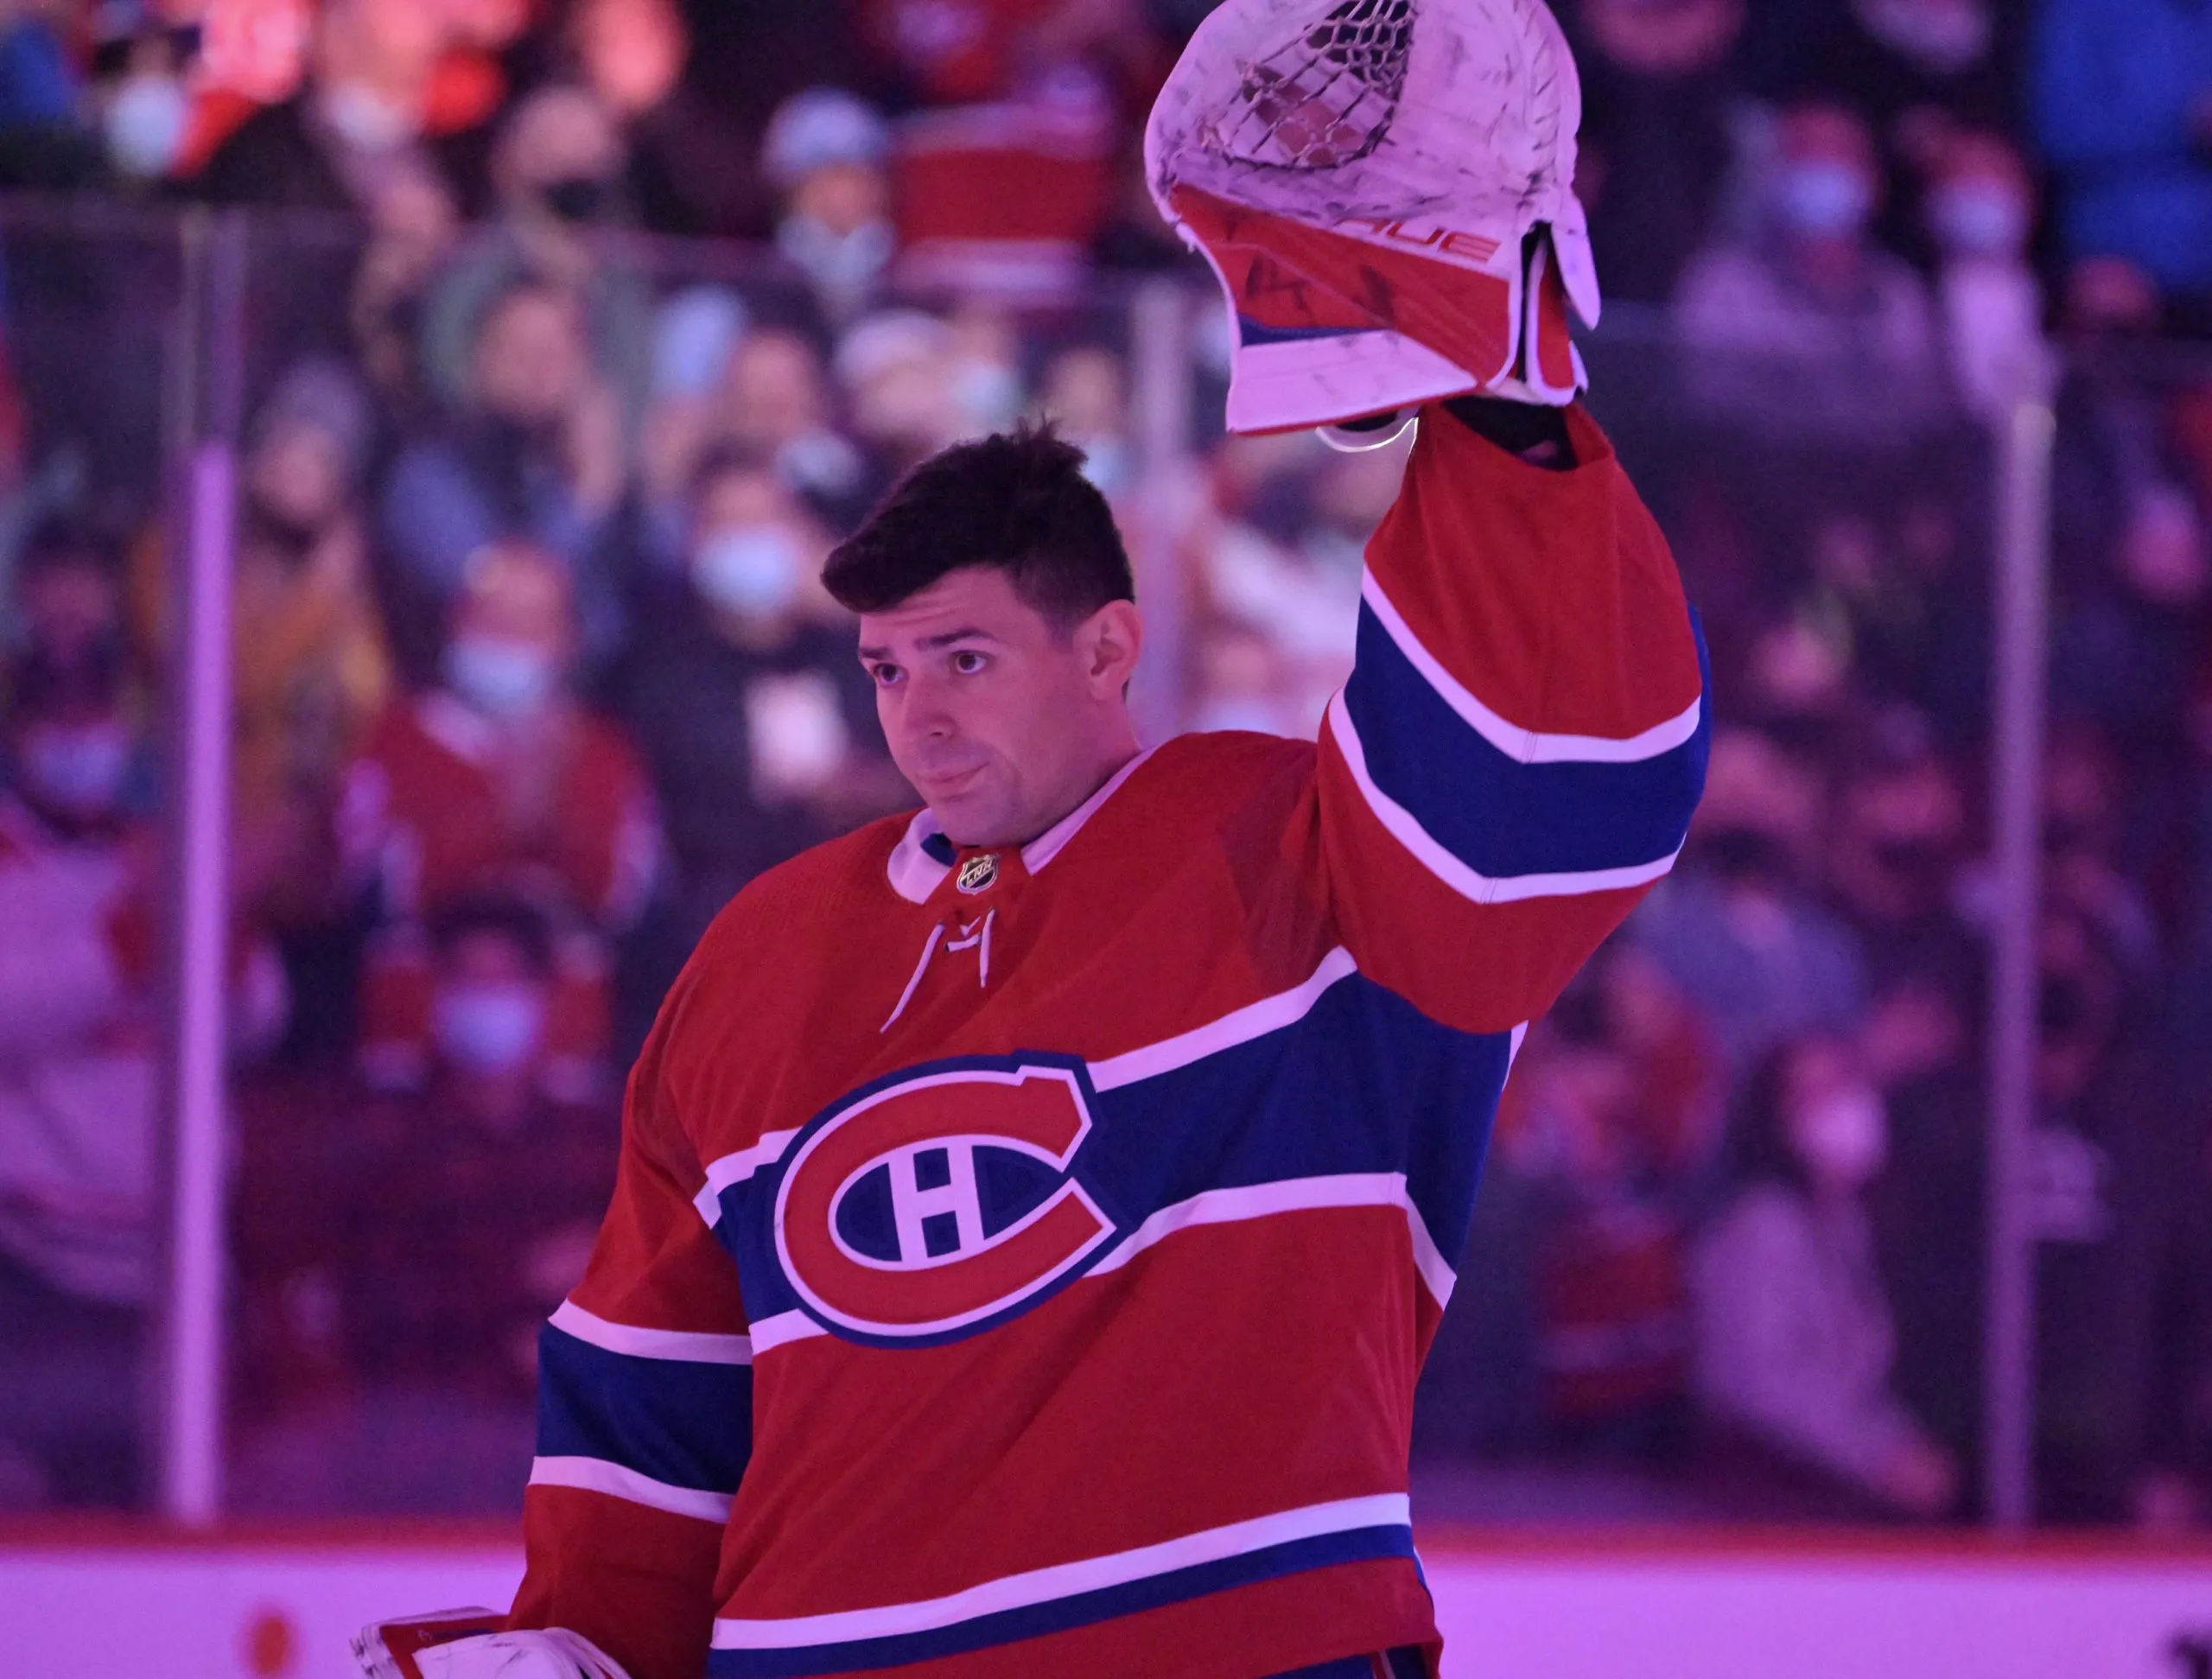 Hughes: Montreal Canadiens goaltender Carey Price’s likely out for 2022-23 season